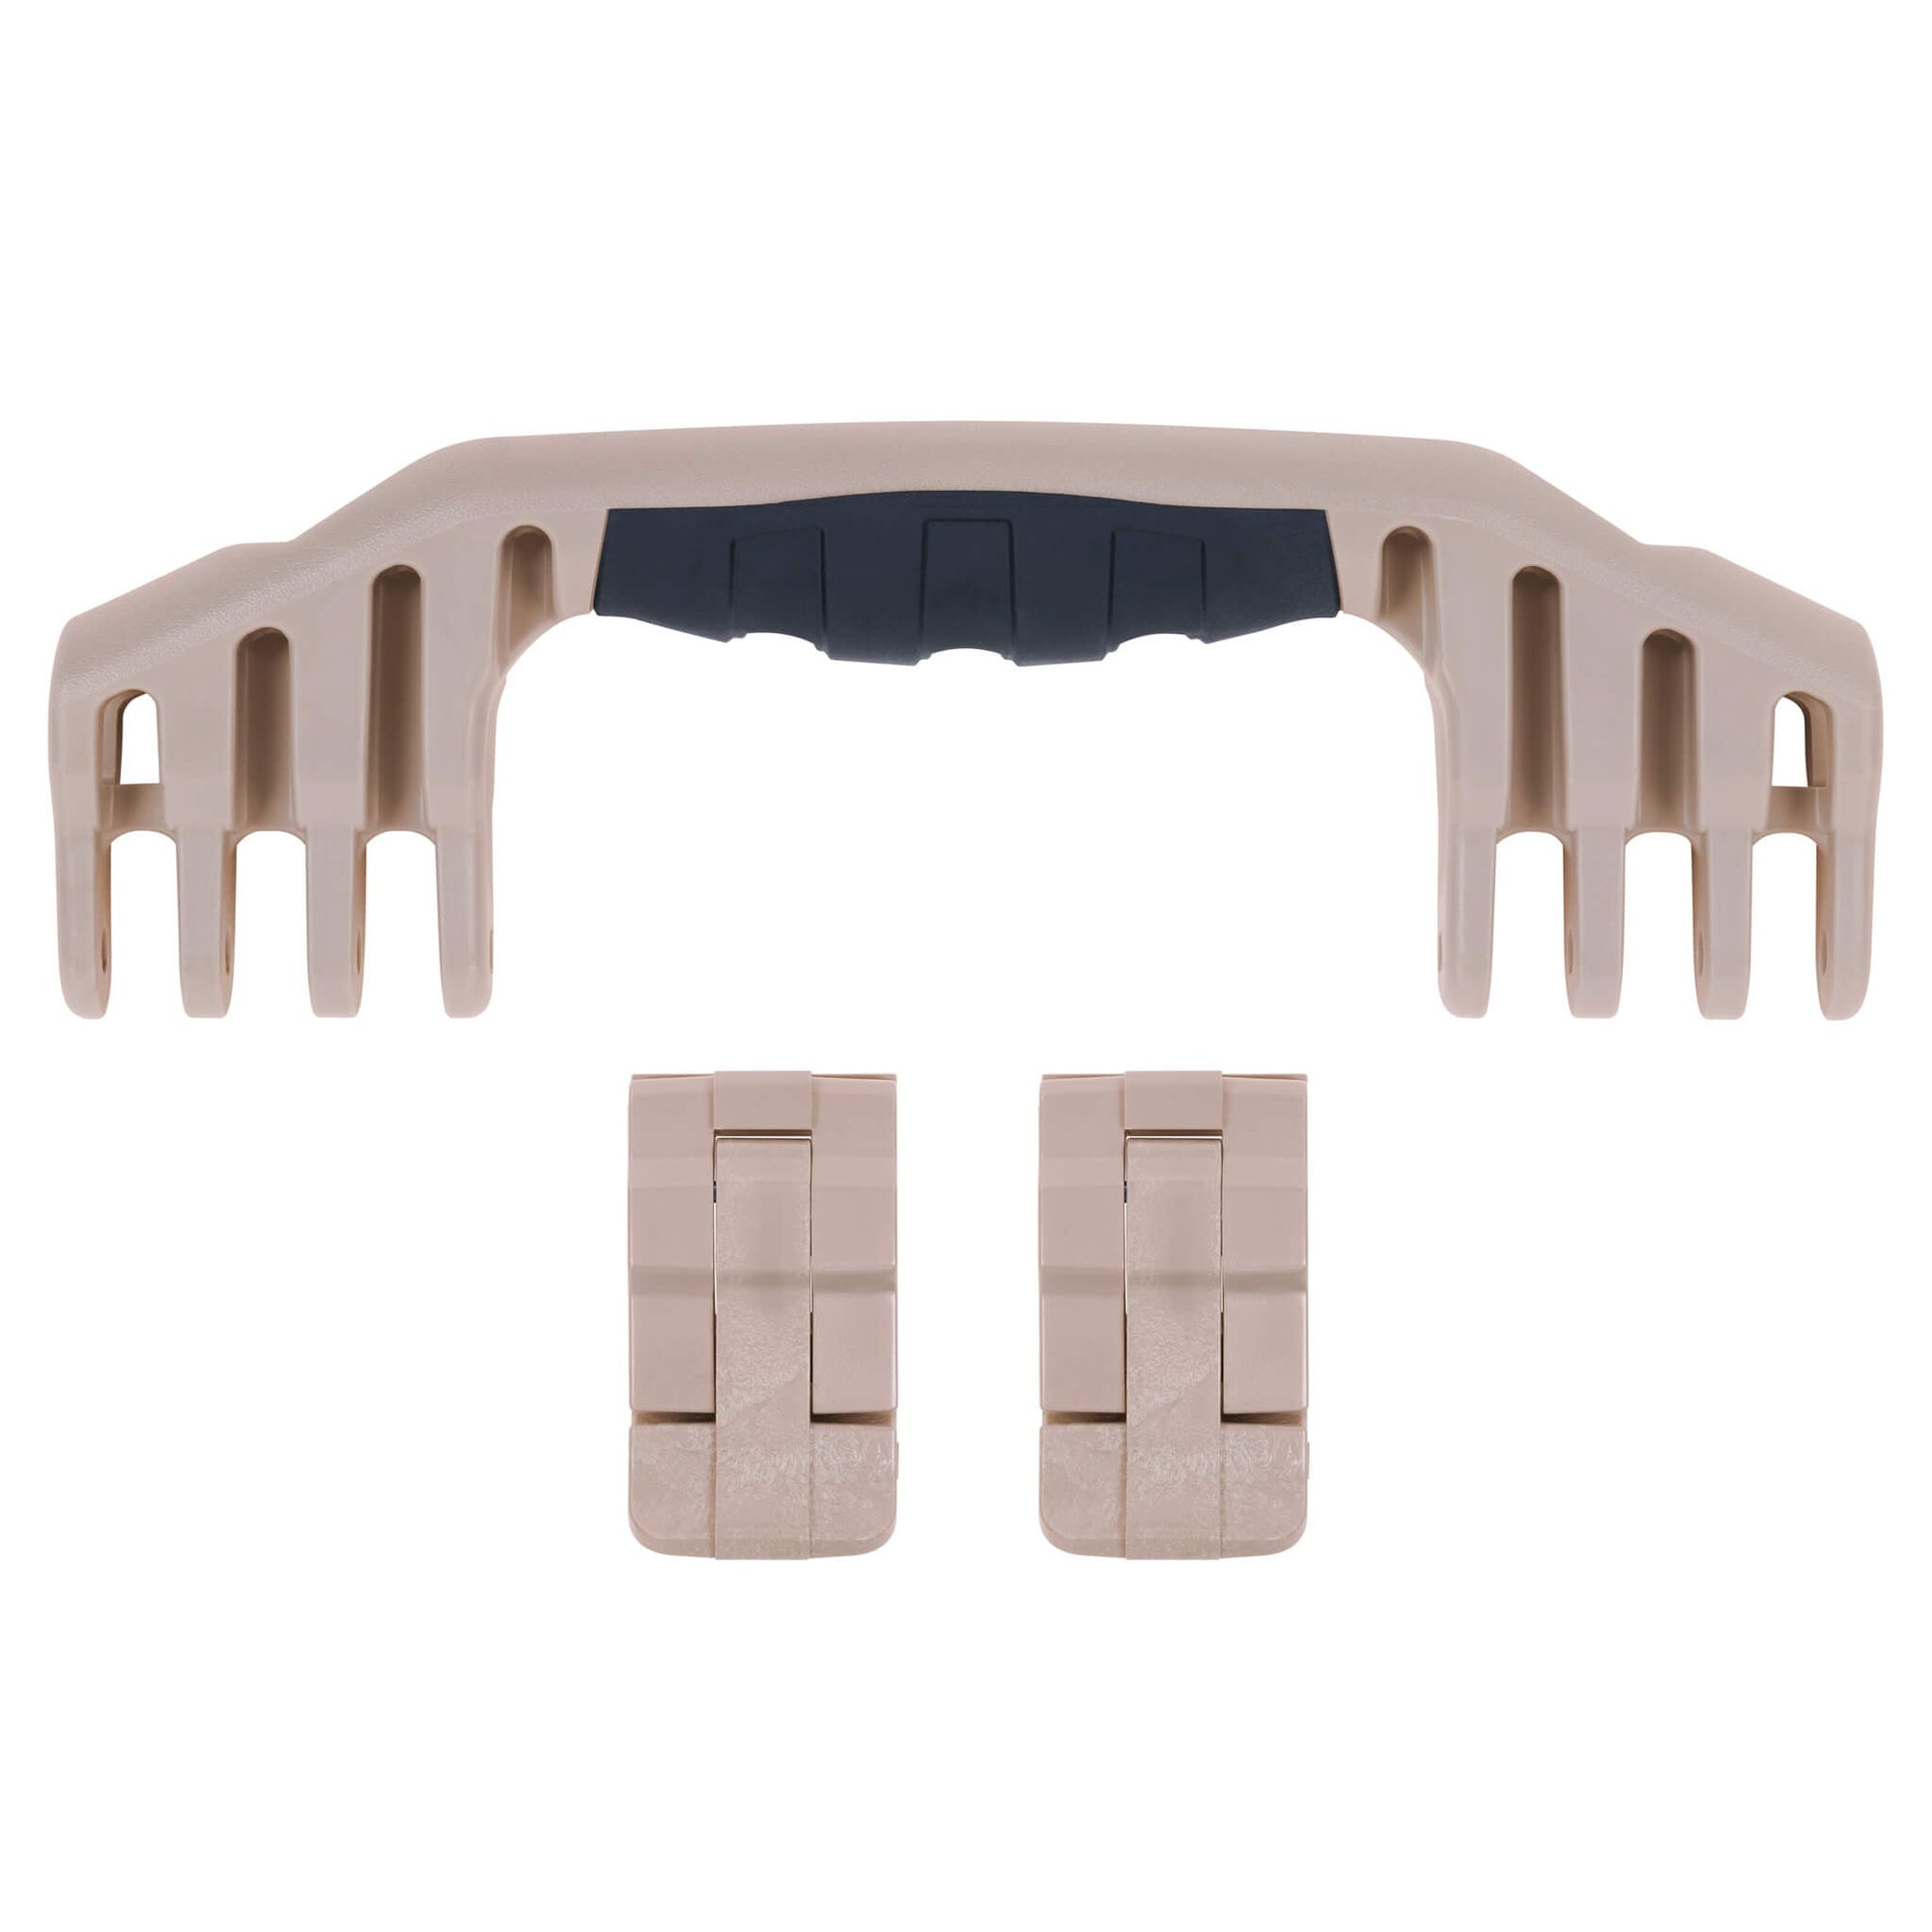 Pelican 1520 Replacement Handle & Latches, Desert Tan (Set of 1 Handle, 2 Latches) ColorCase 